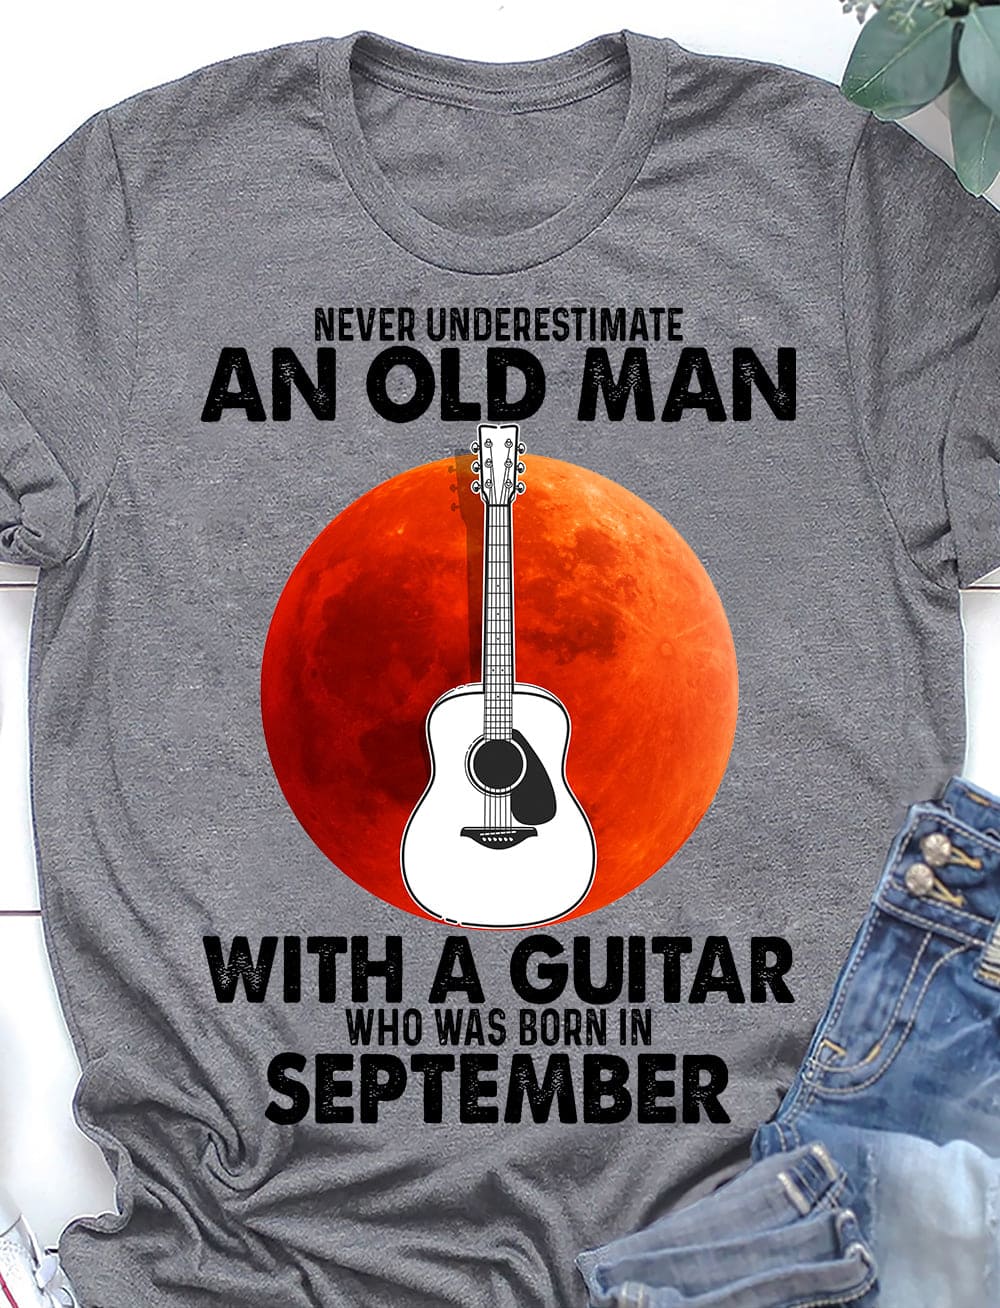 Never underestimate an old man with a guitar who was born in September - Gift for old guitarist